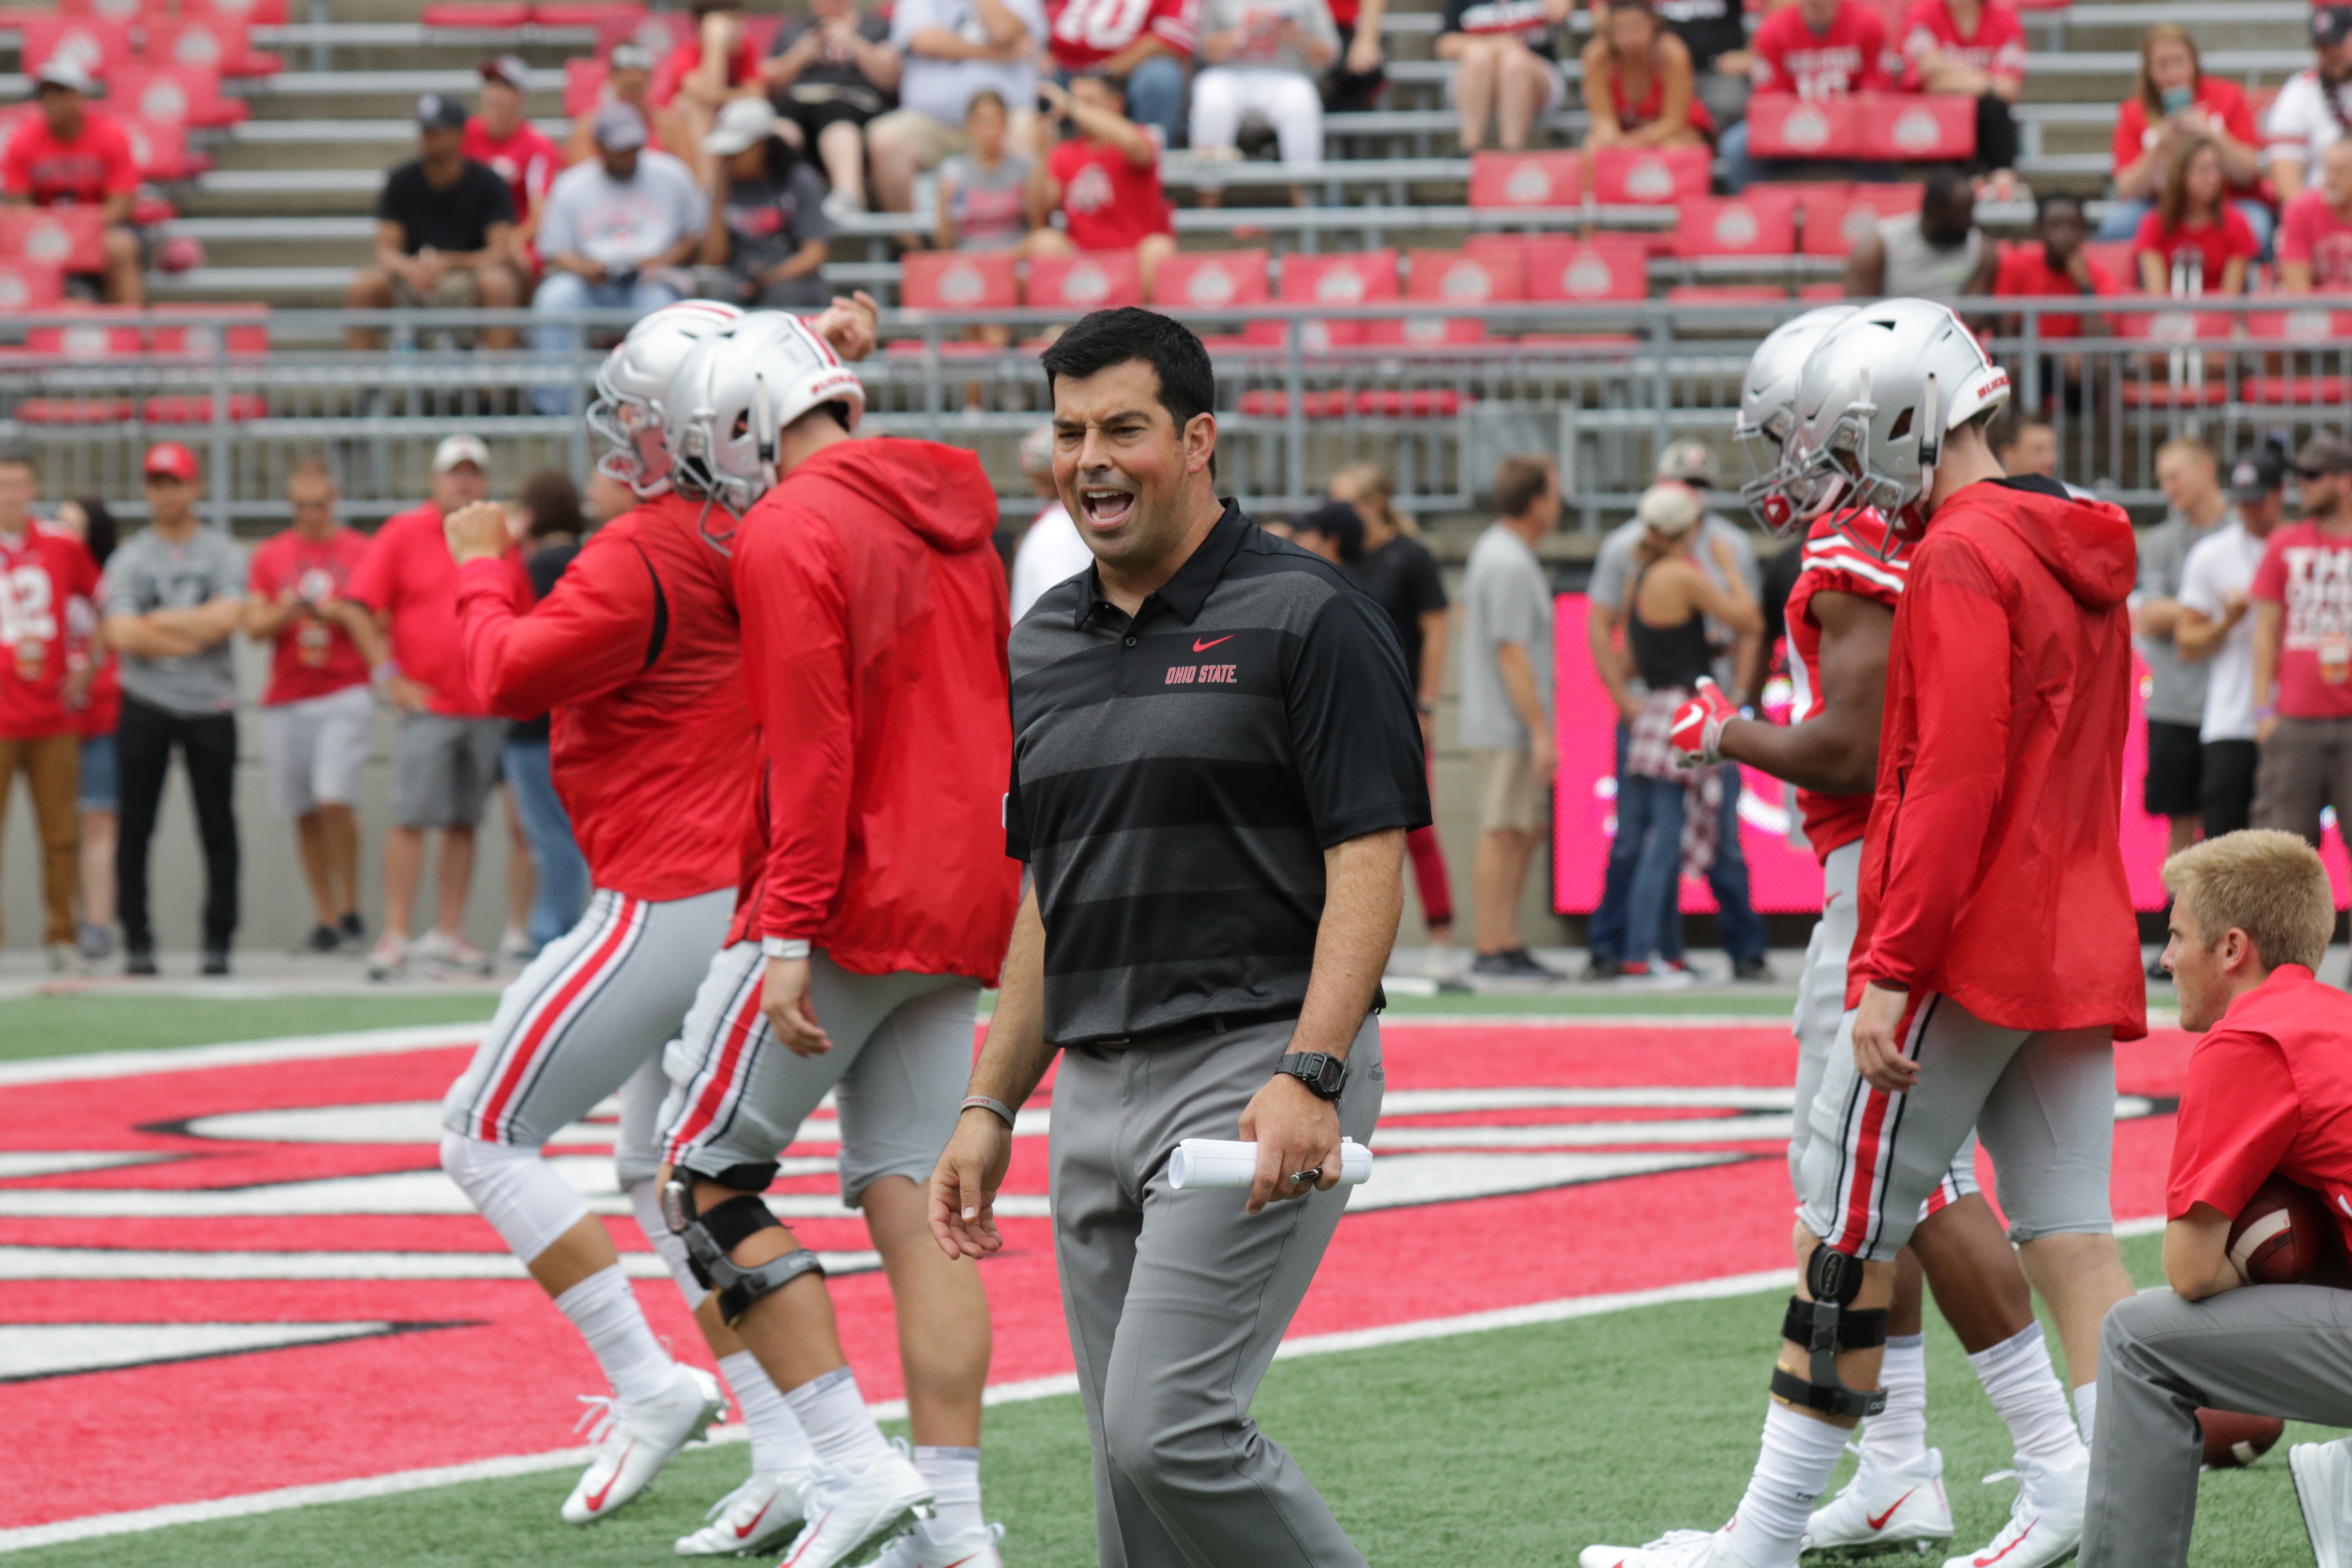 Ohio State Spring Game Tickets On Sale Friday; Kickoff Set For Noon